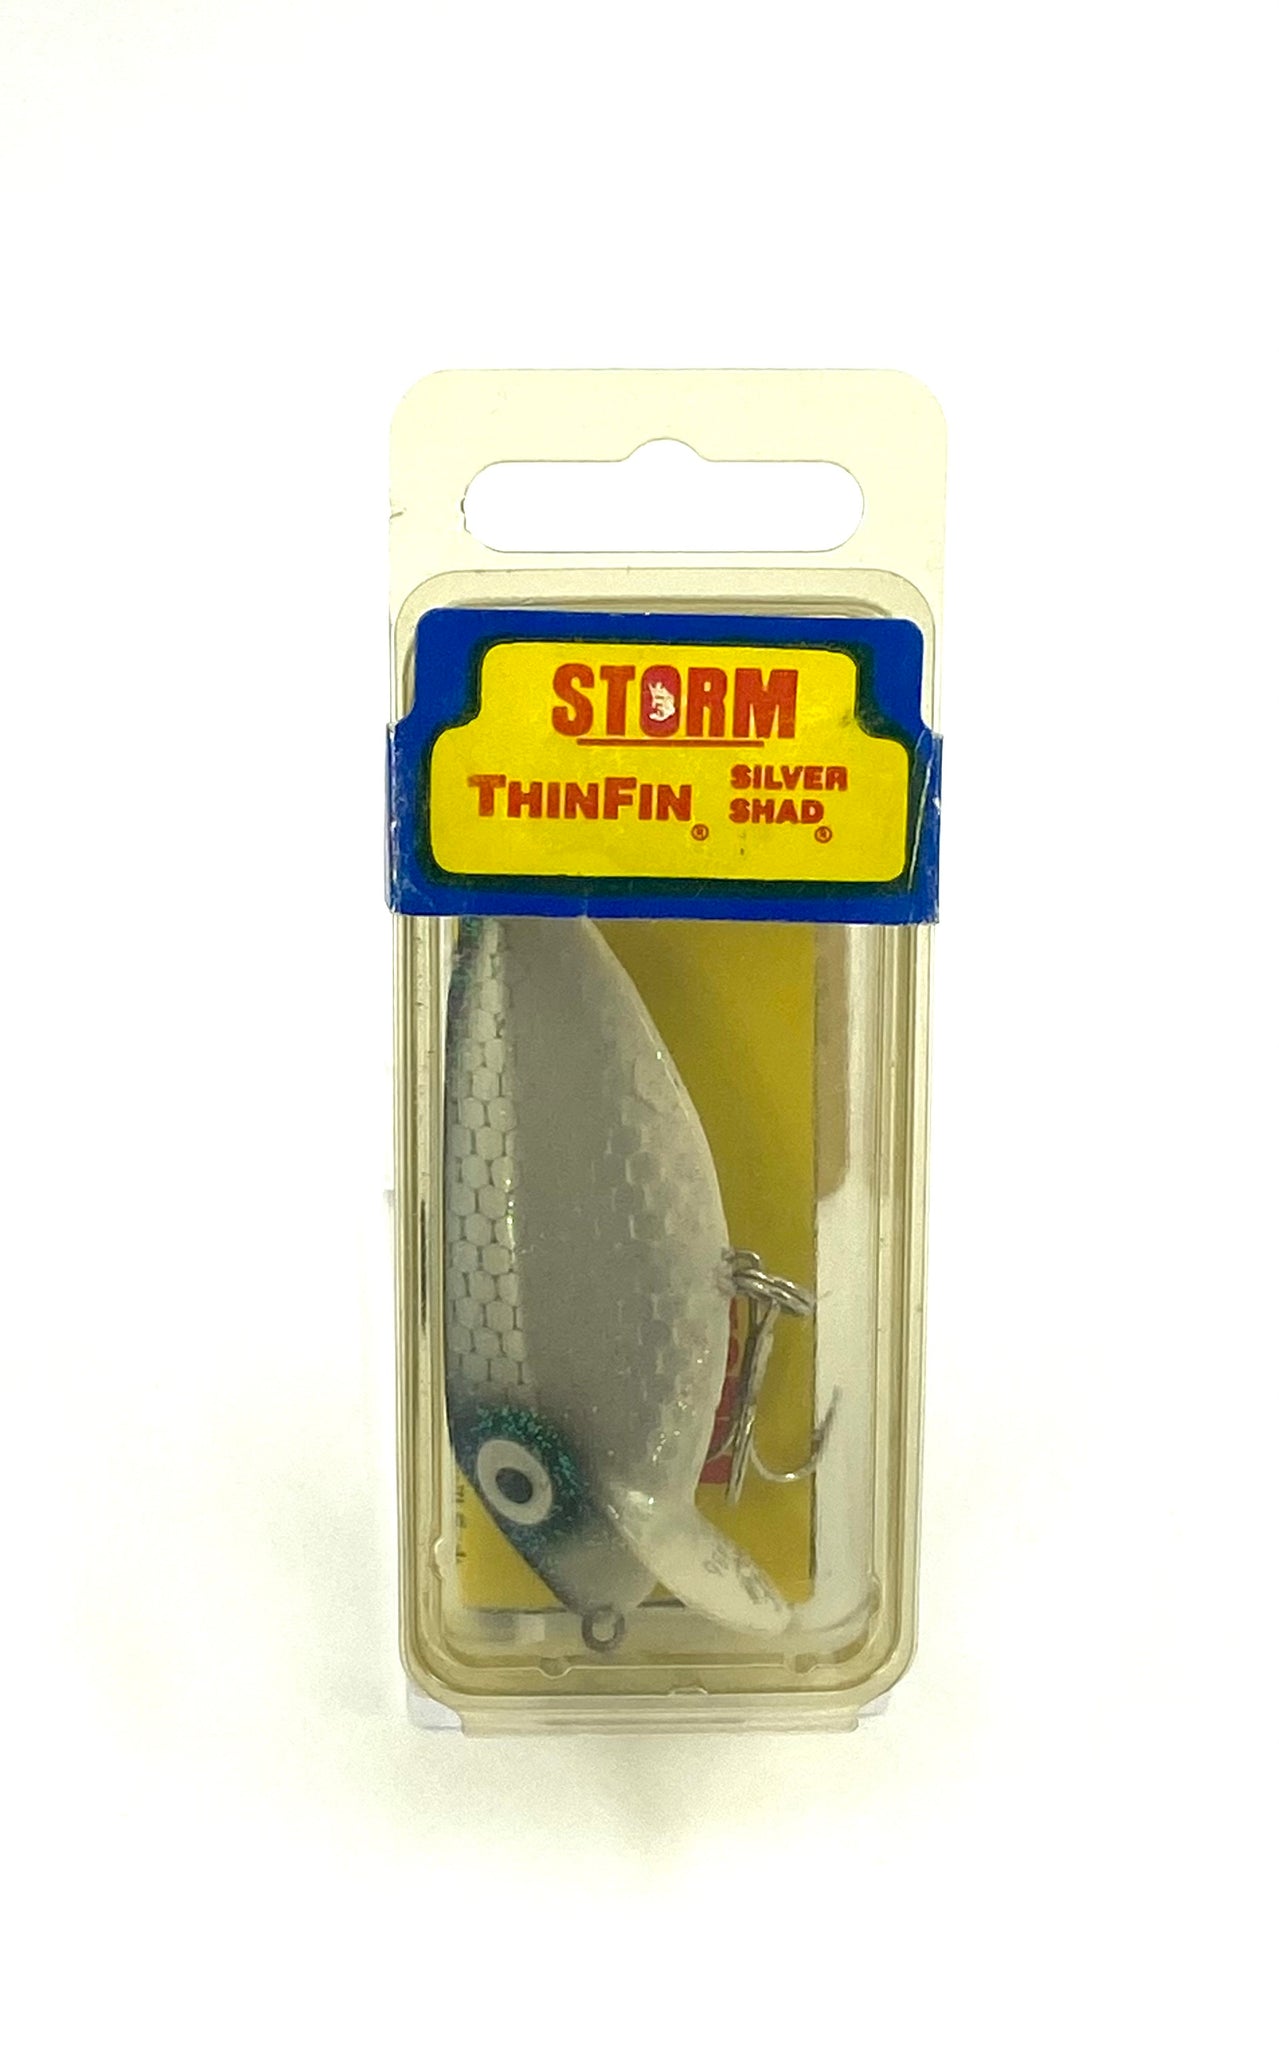 SPECIAL EDITION • STORM T3C ThinFin Silver Shad Fishing Lure